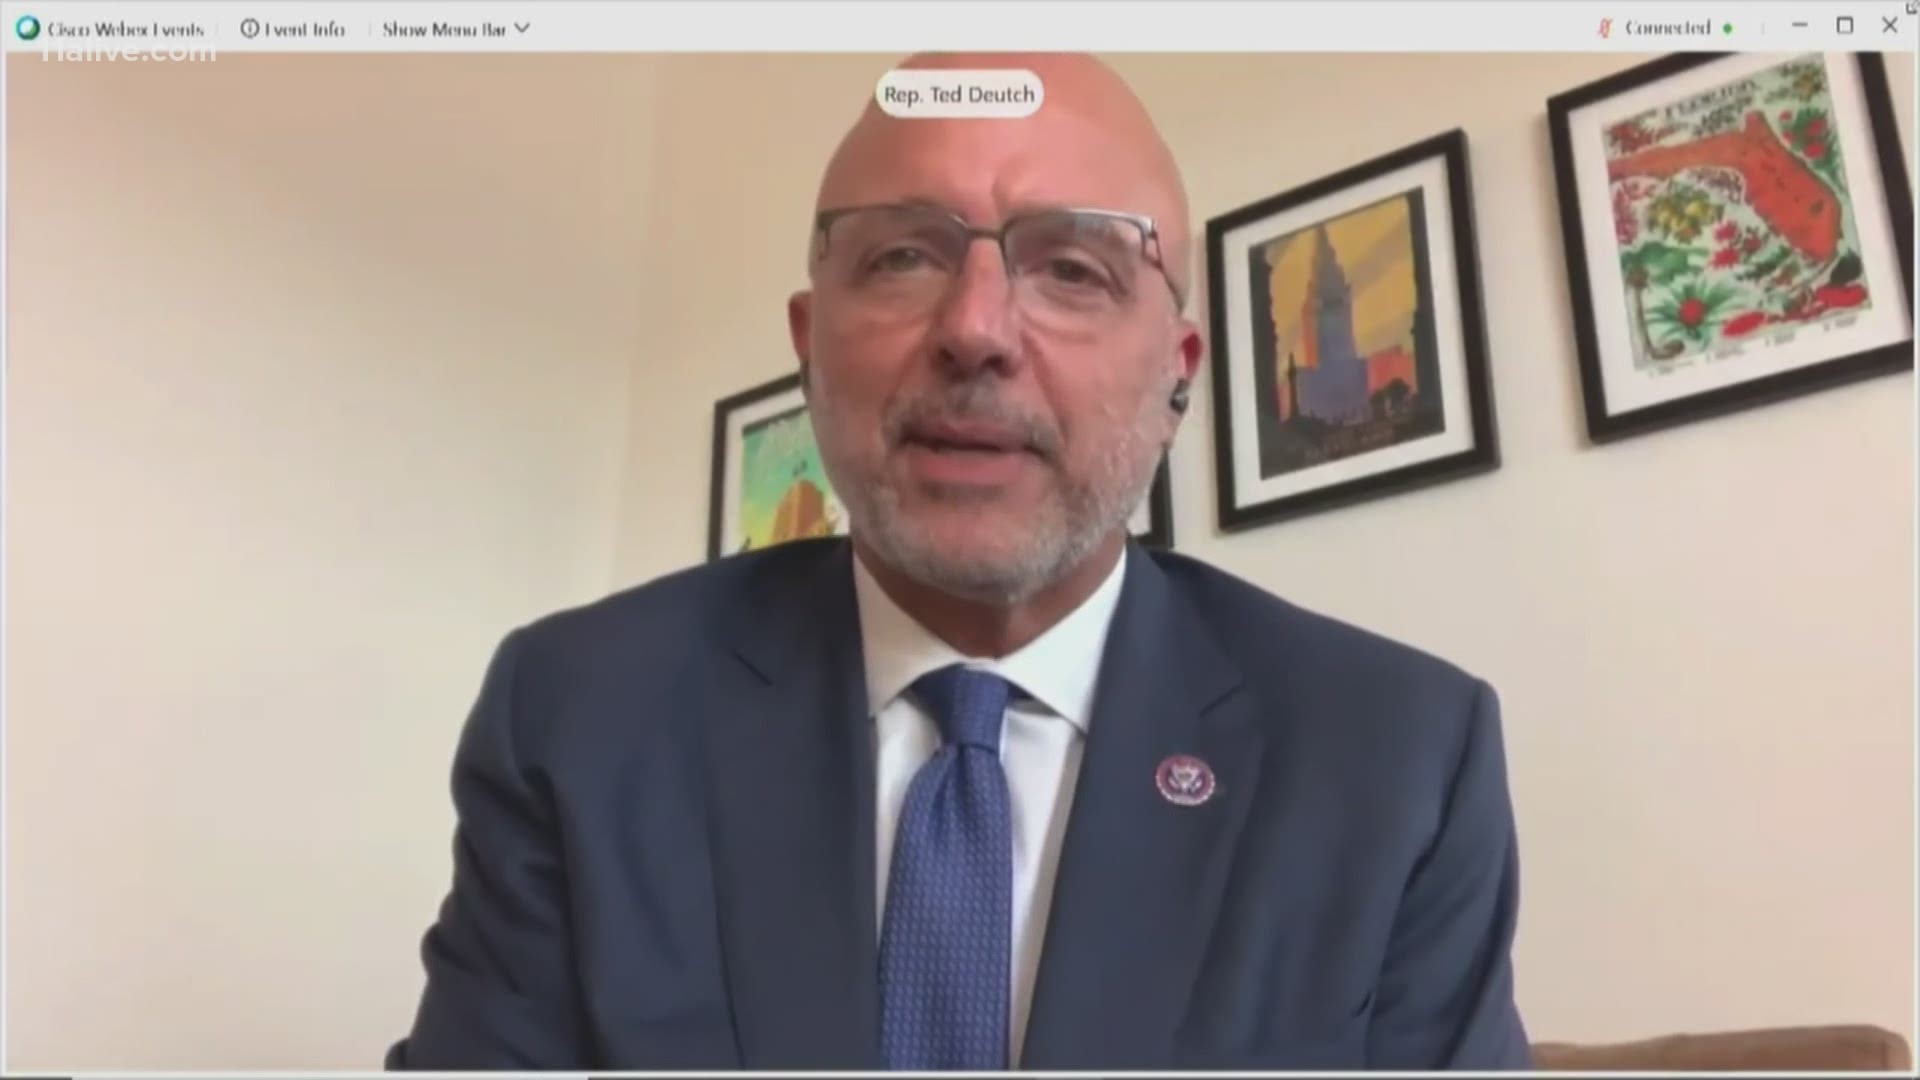 Rep. Ted Deutch, who is the Ethics Committee chairman, spoke Wednesday.